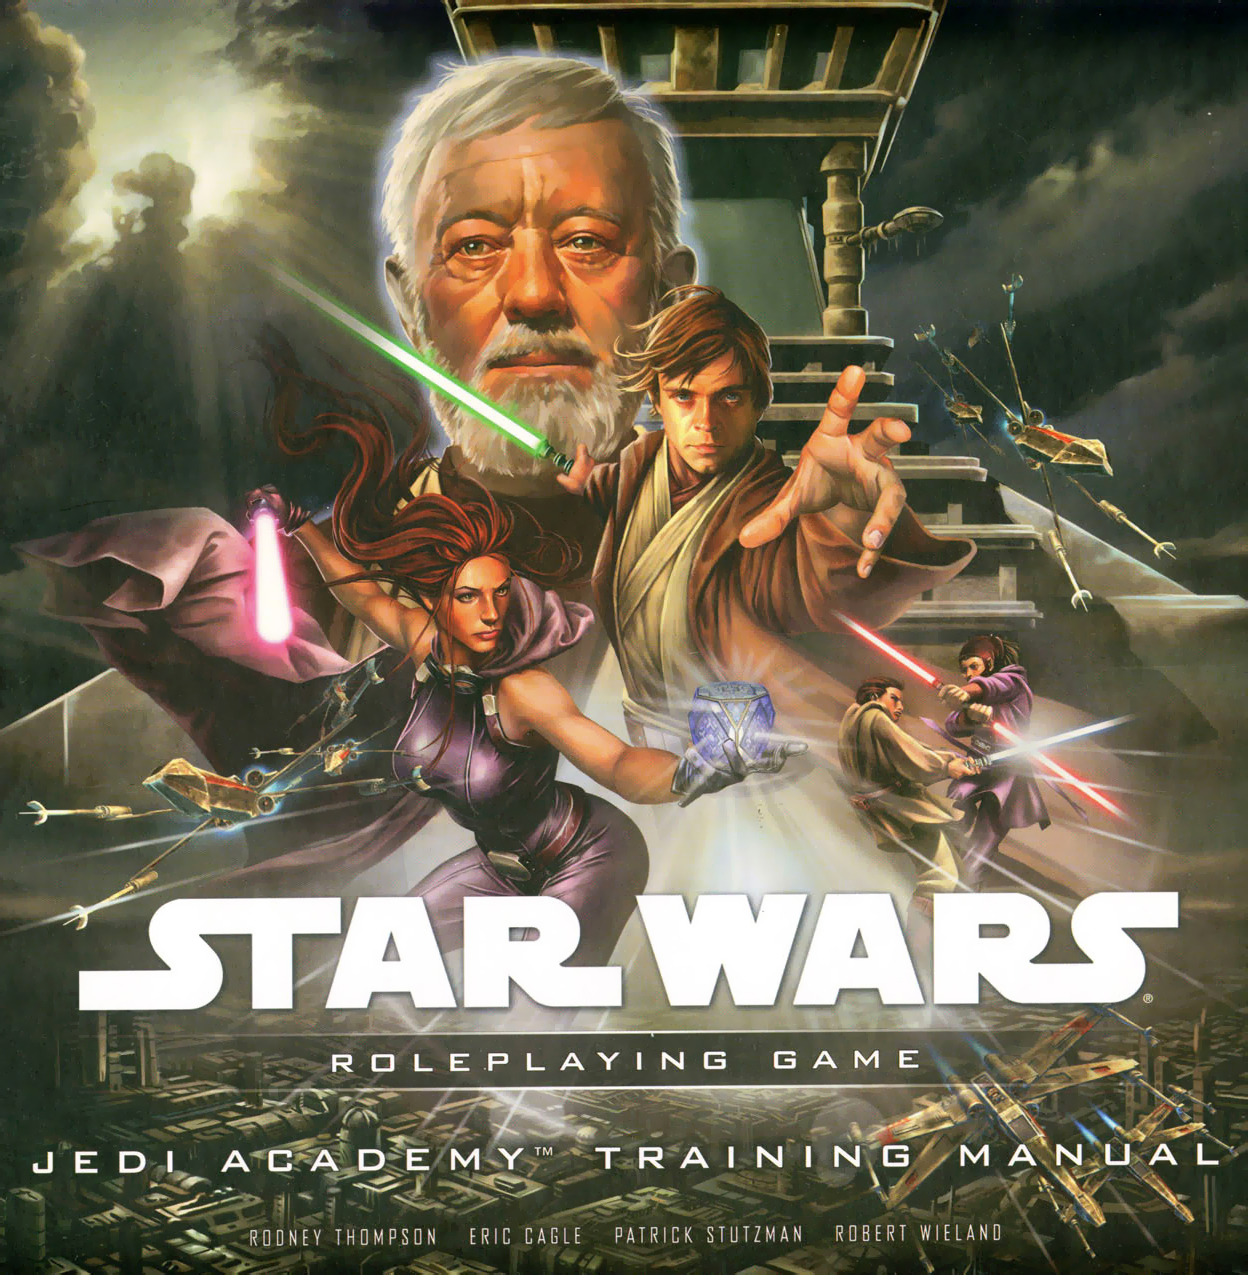 Star Wars: The Roleplaying Game, Wookieepedia